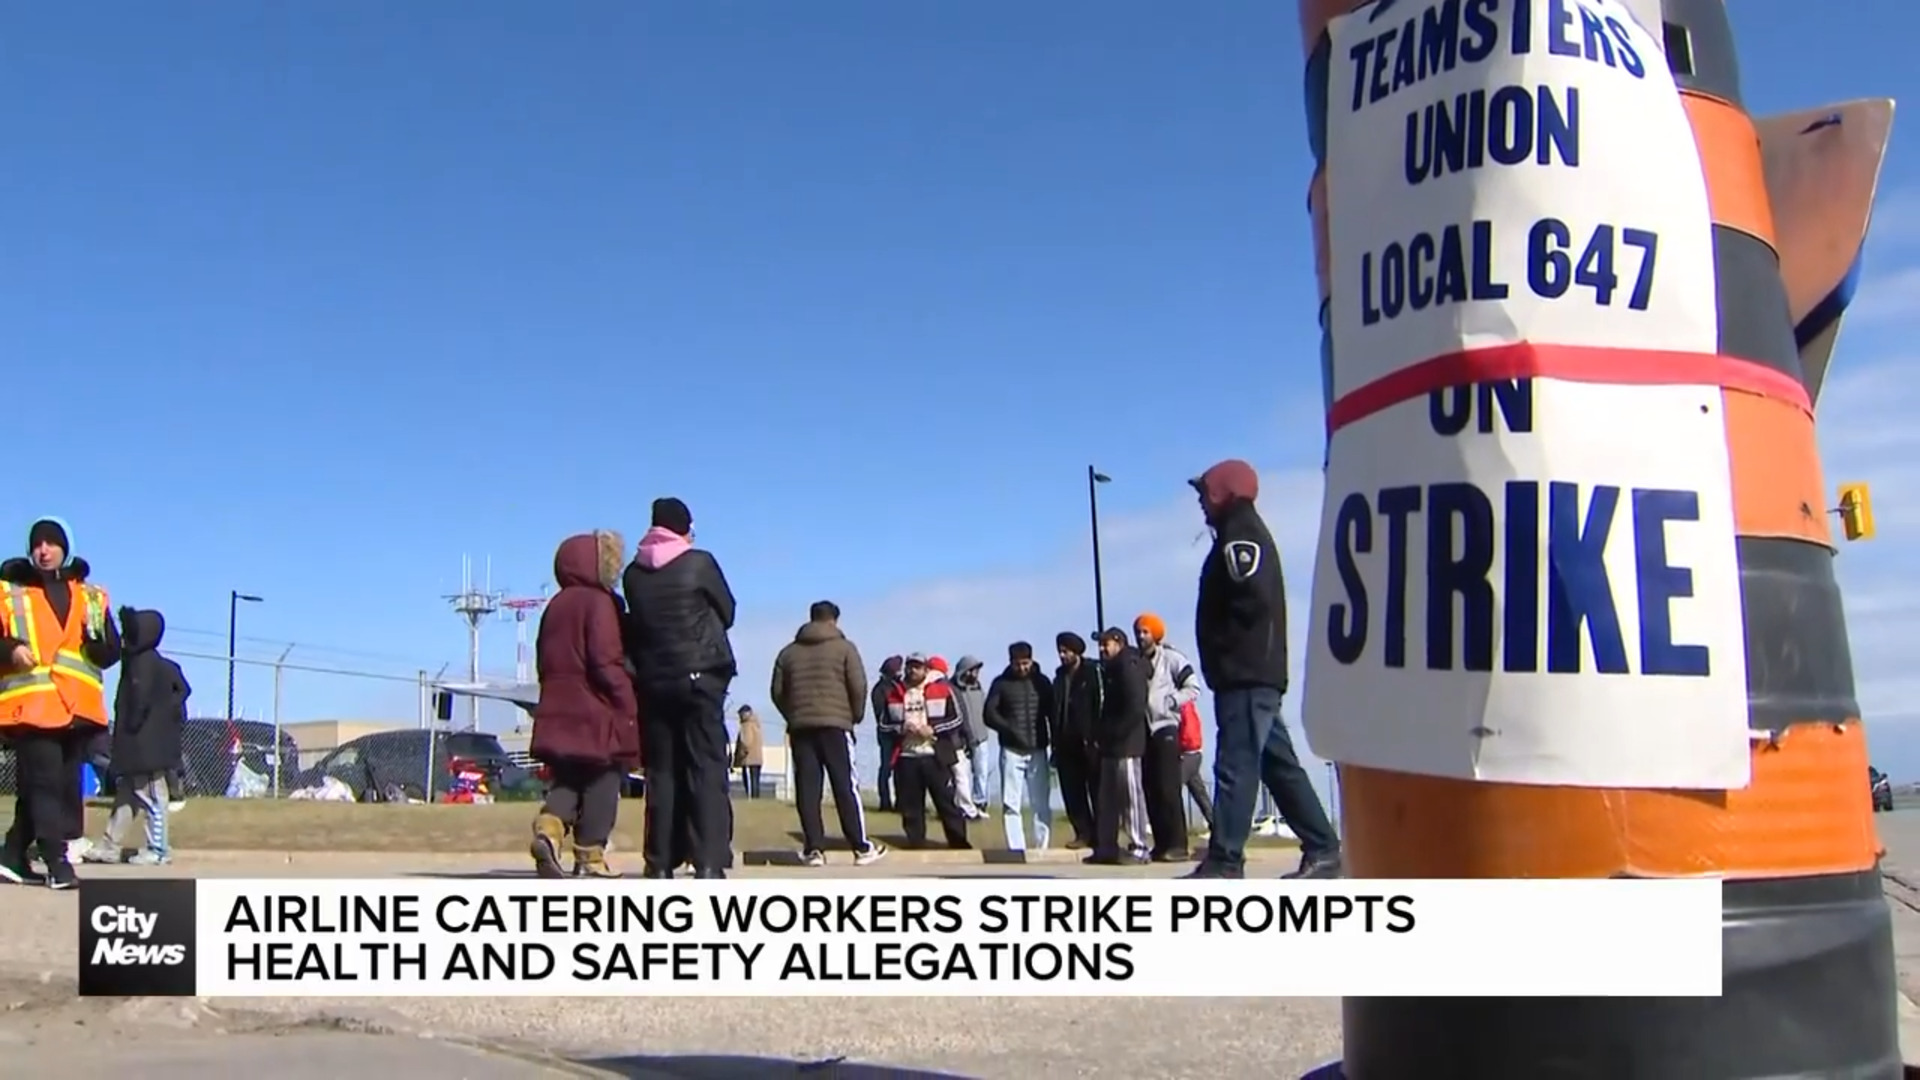 Airline catering workers strike continues into its second week